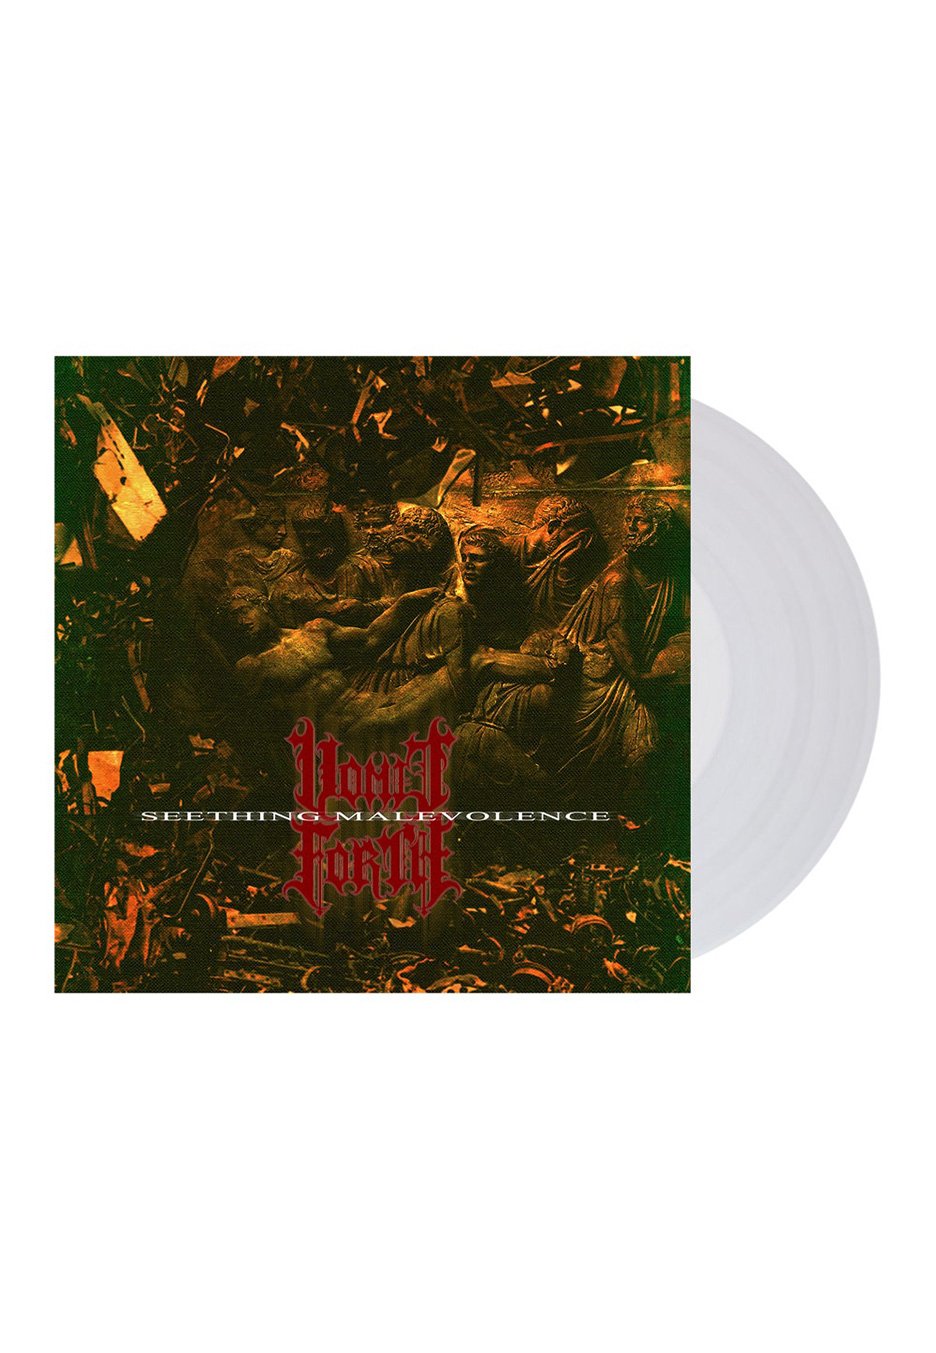 Vomit Forth - Seething Malevolence Clear - Colored Vinyl